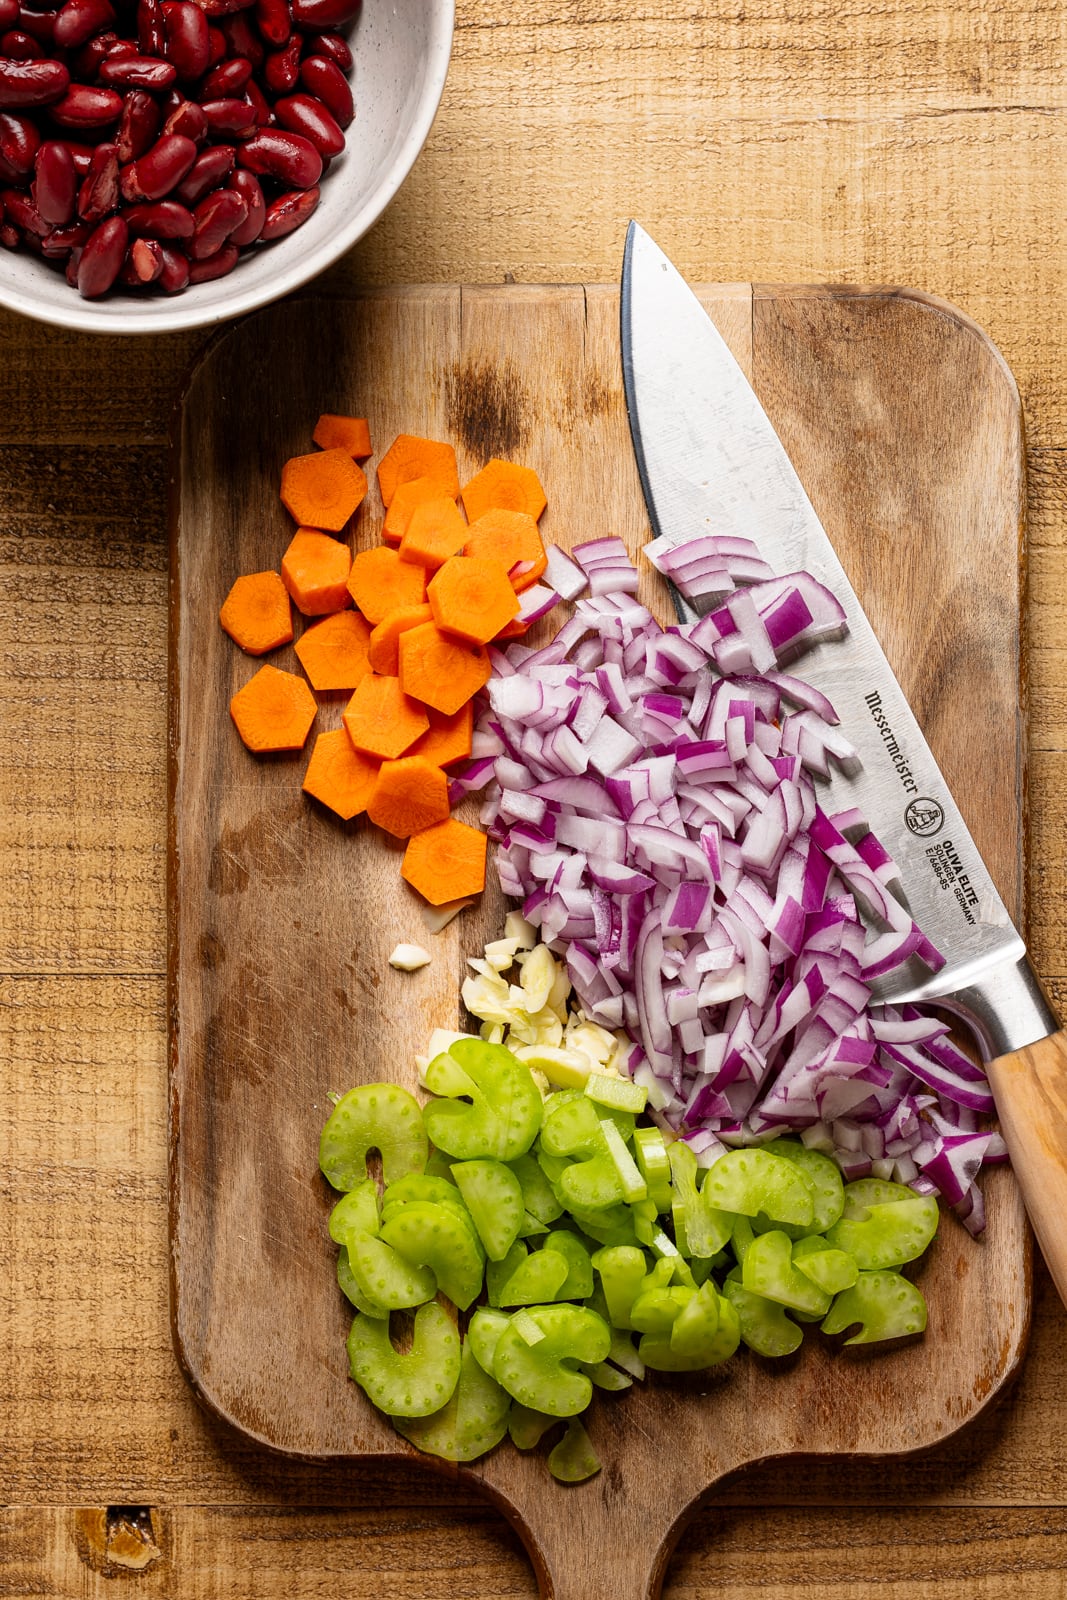 Chopped veggies on a cutting board with a knife. 